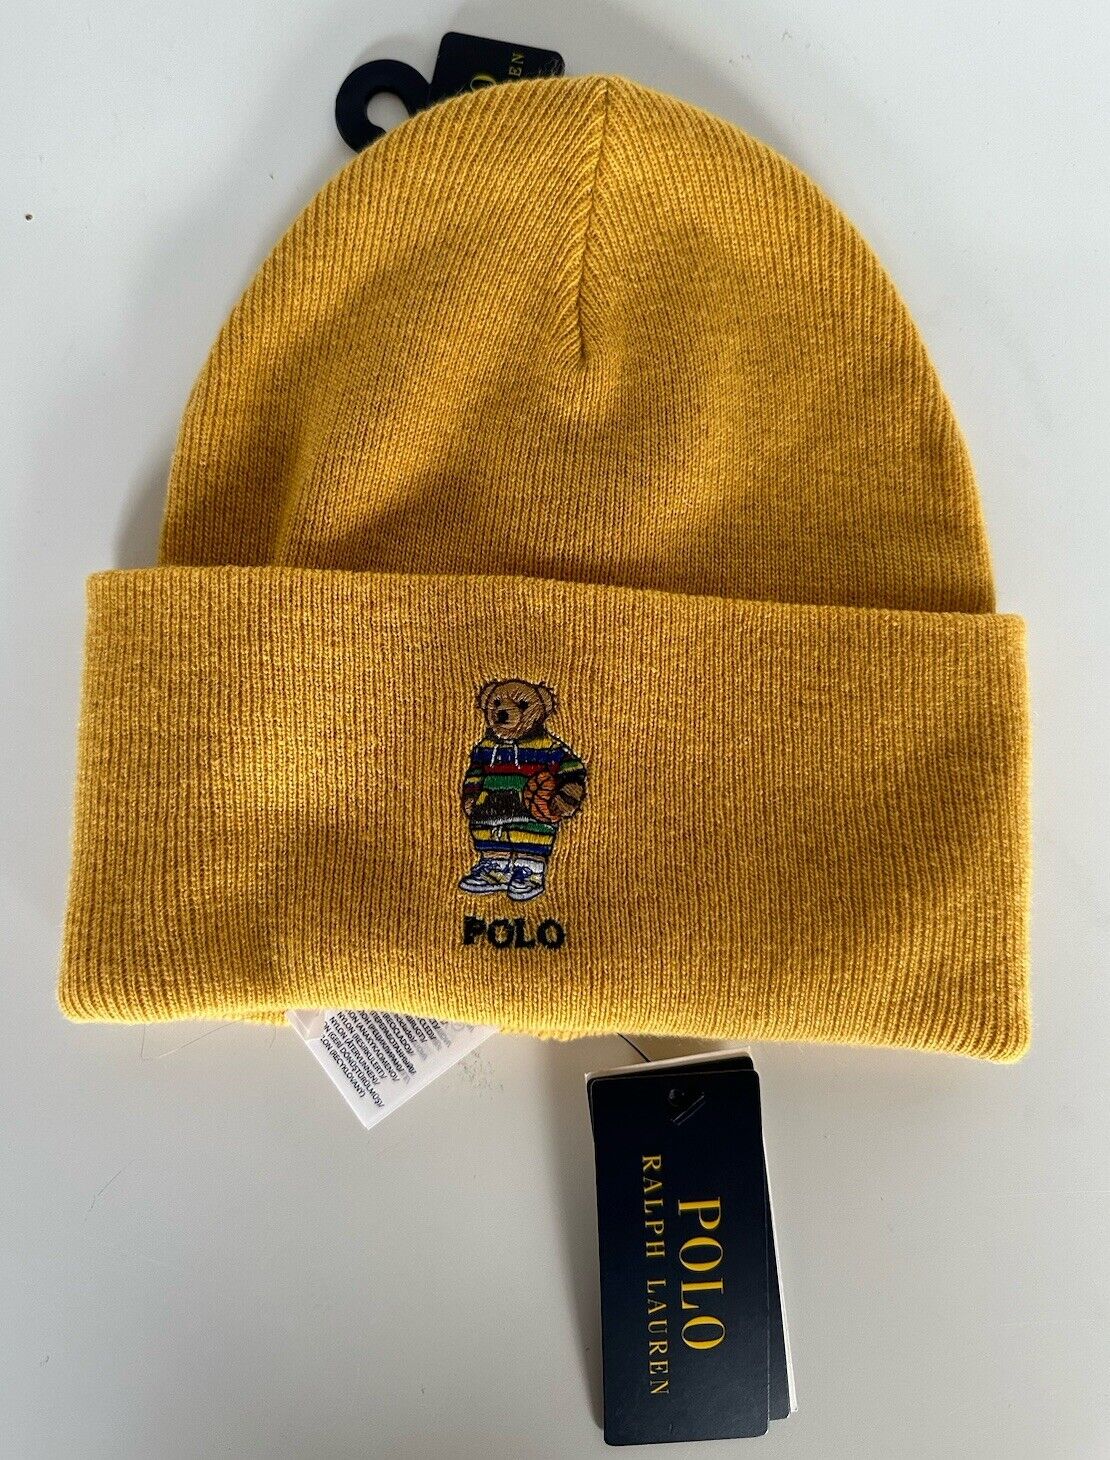 NWT Polo Ralph Lauren Polo Bear Yellow Hat One Size